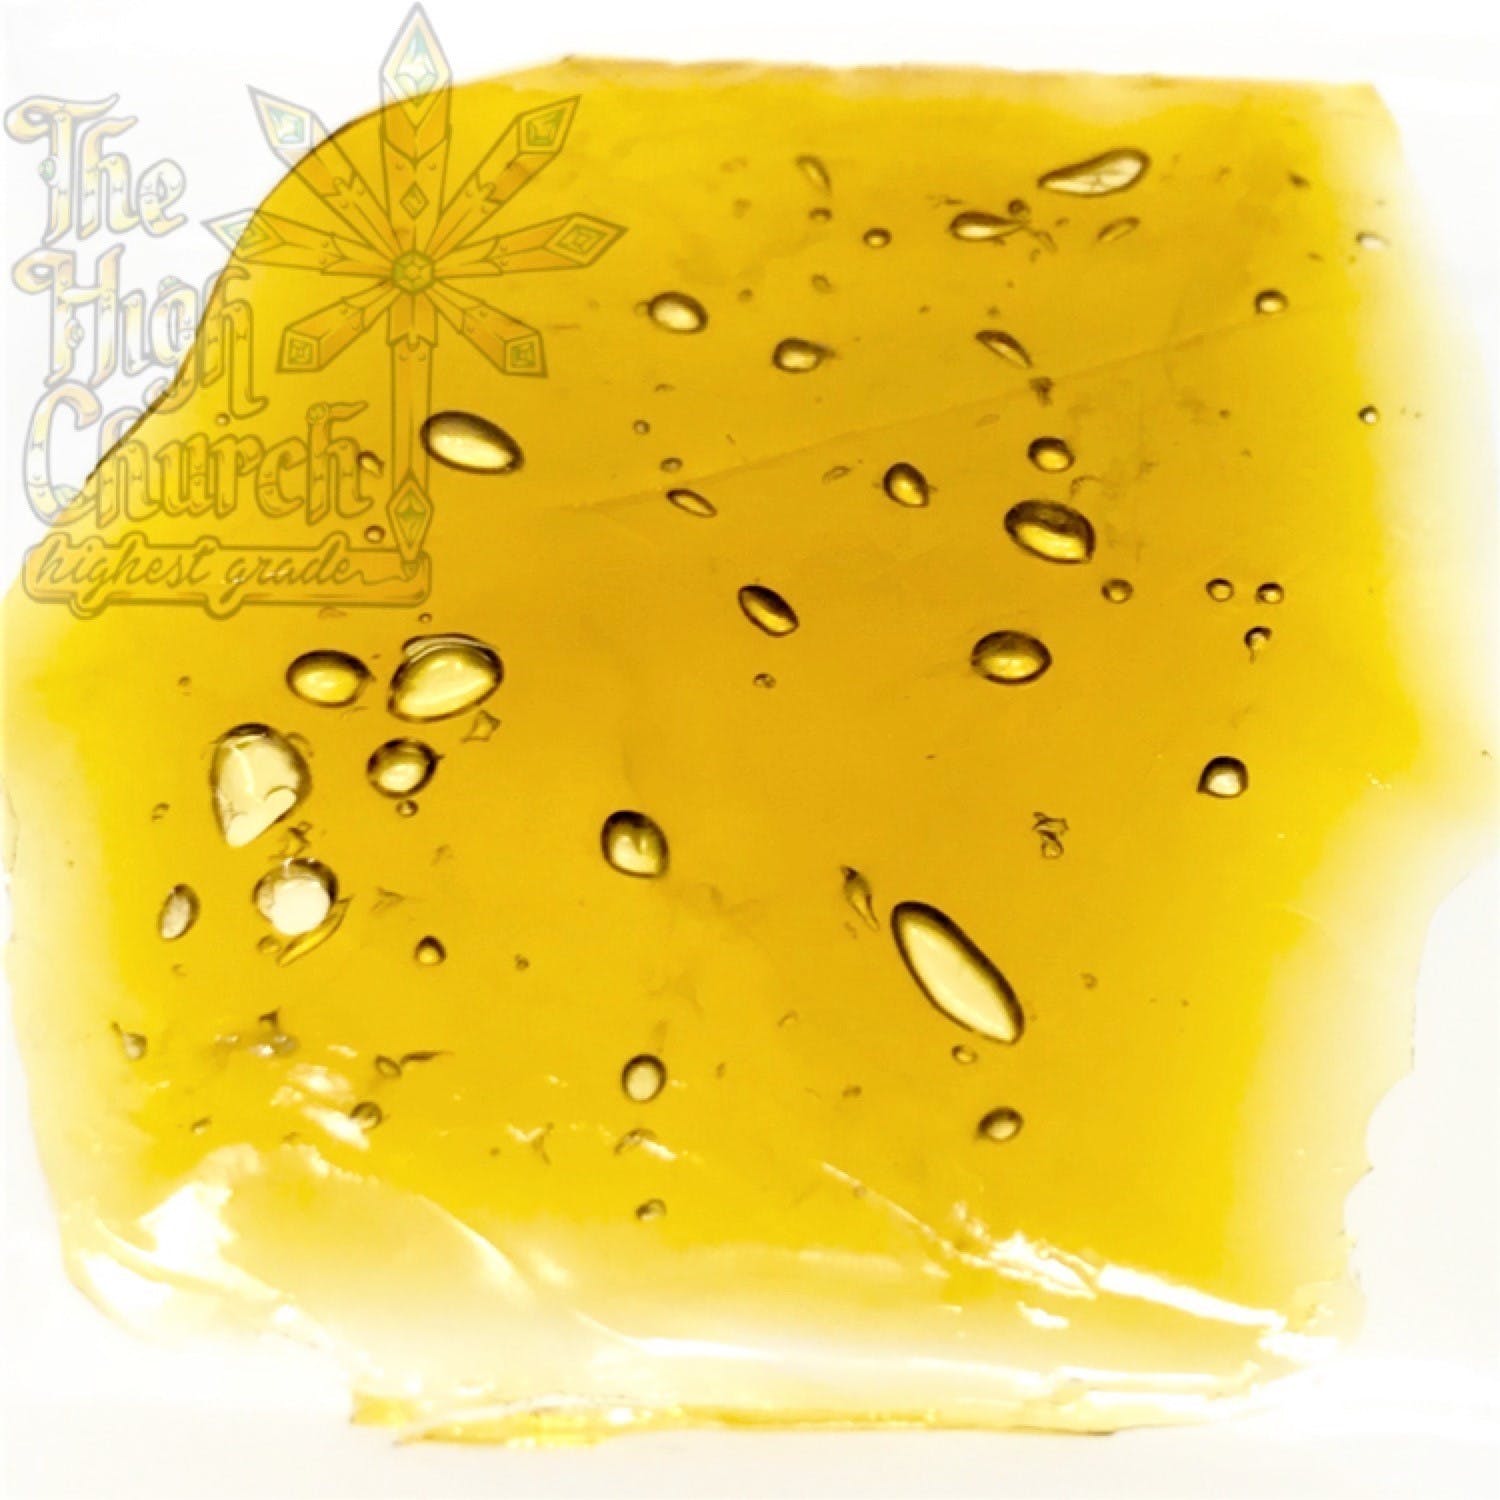 Shaman Extracts - Purple Punch Dewaxed Shatter